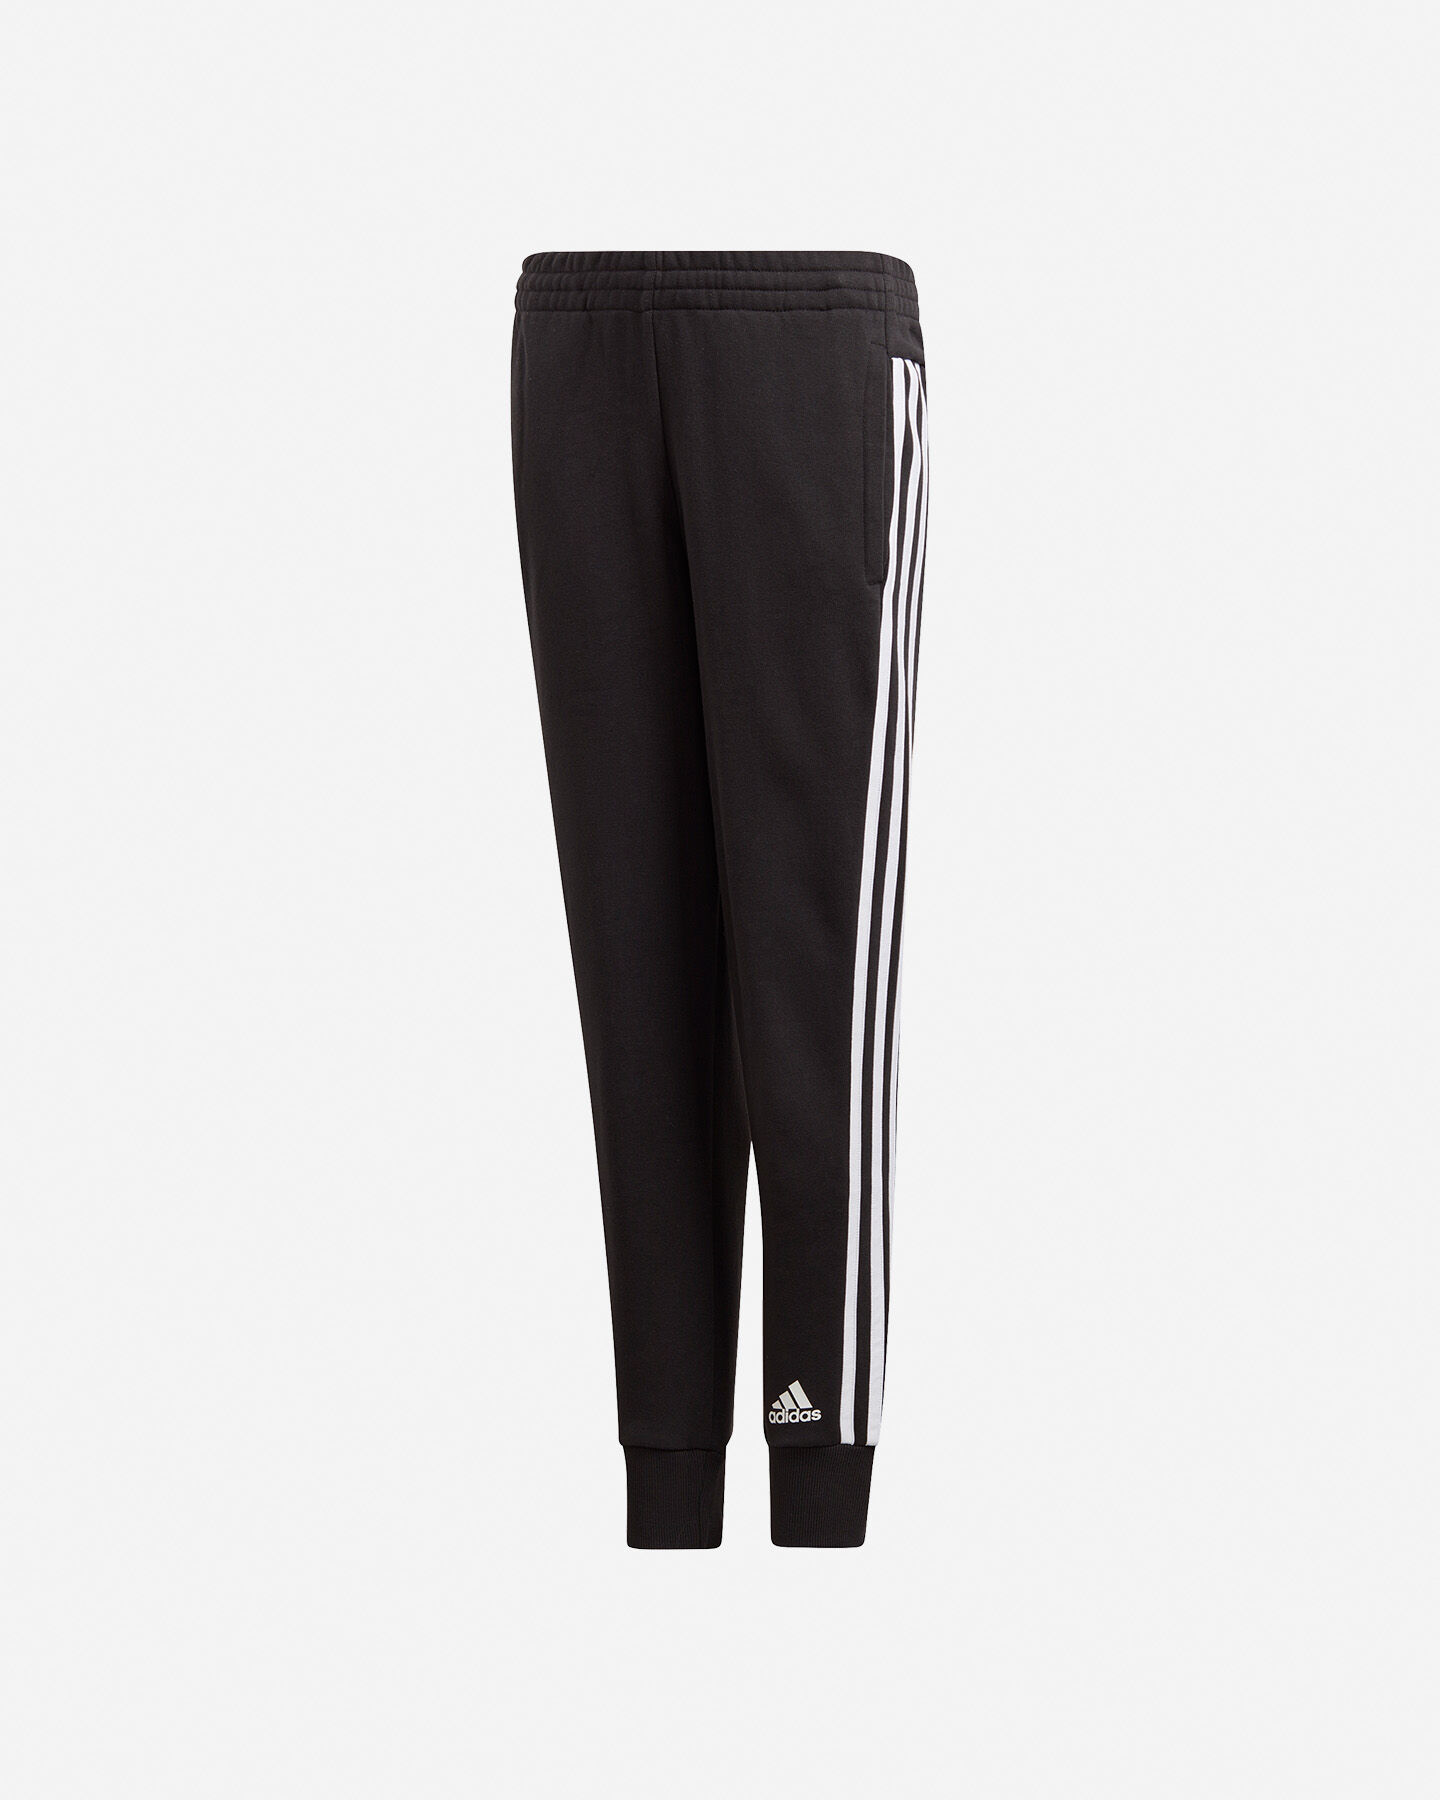  Pantalone ADIDAS MUST HAVES 3-STRIPES JR S5011814|UNI|7-8A scatto 0